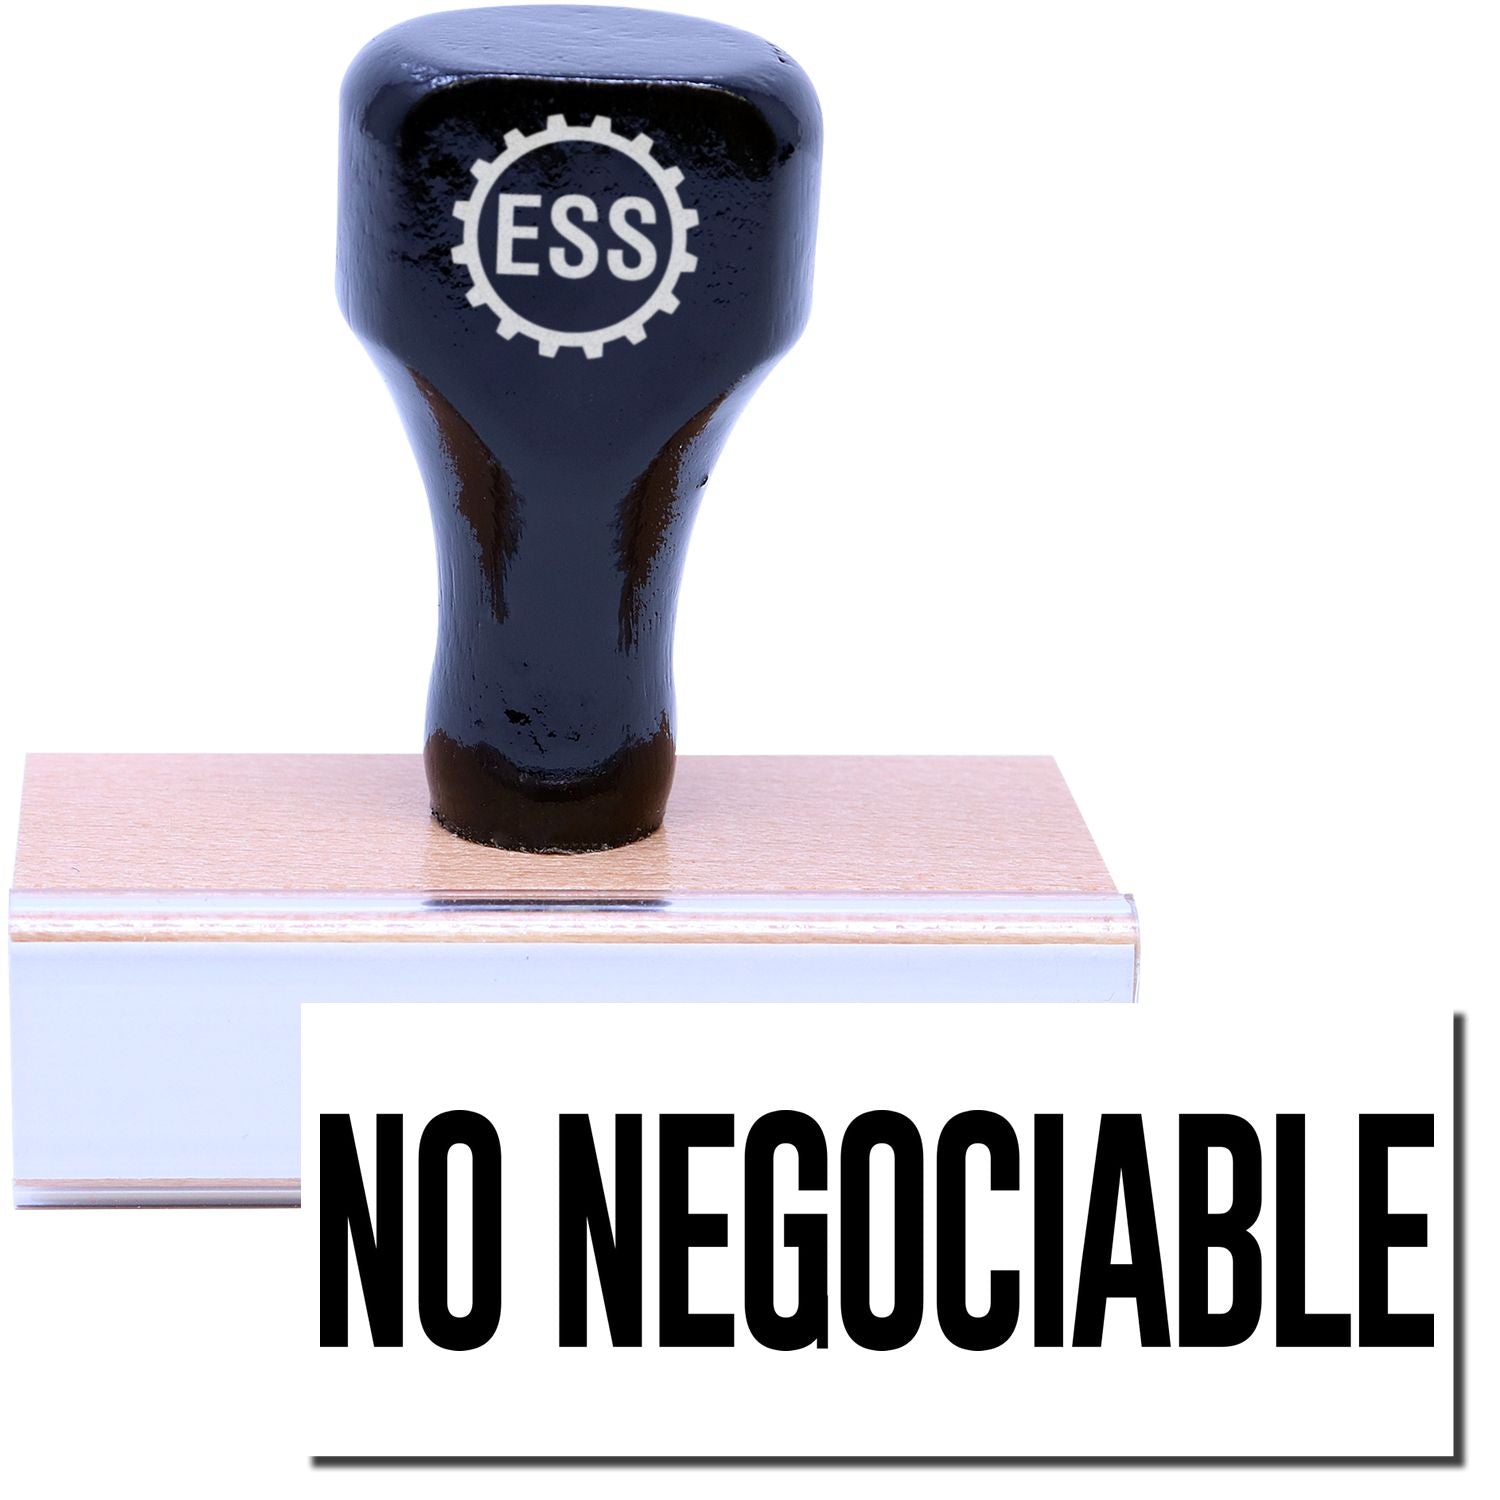 A stock office rubber stamp with a stamped image showing how the text "NO NEGOCIABLE" in a large font is displayed after stamping.